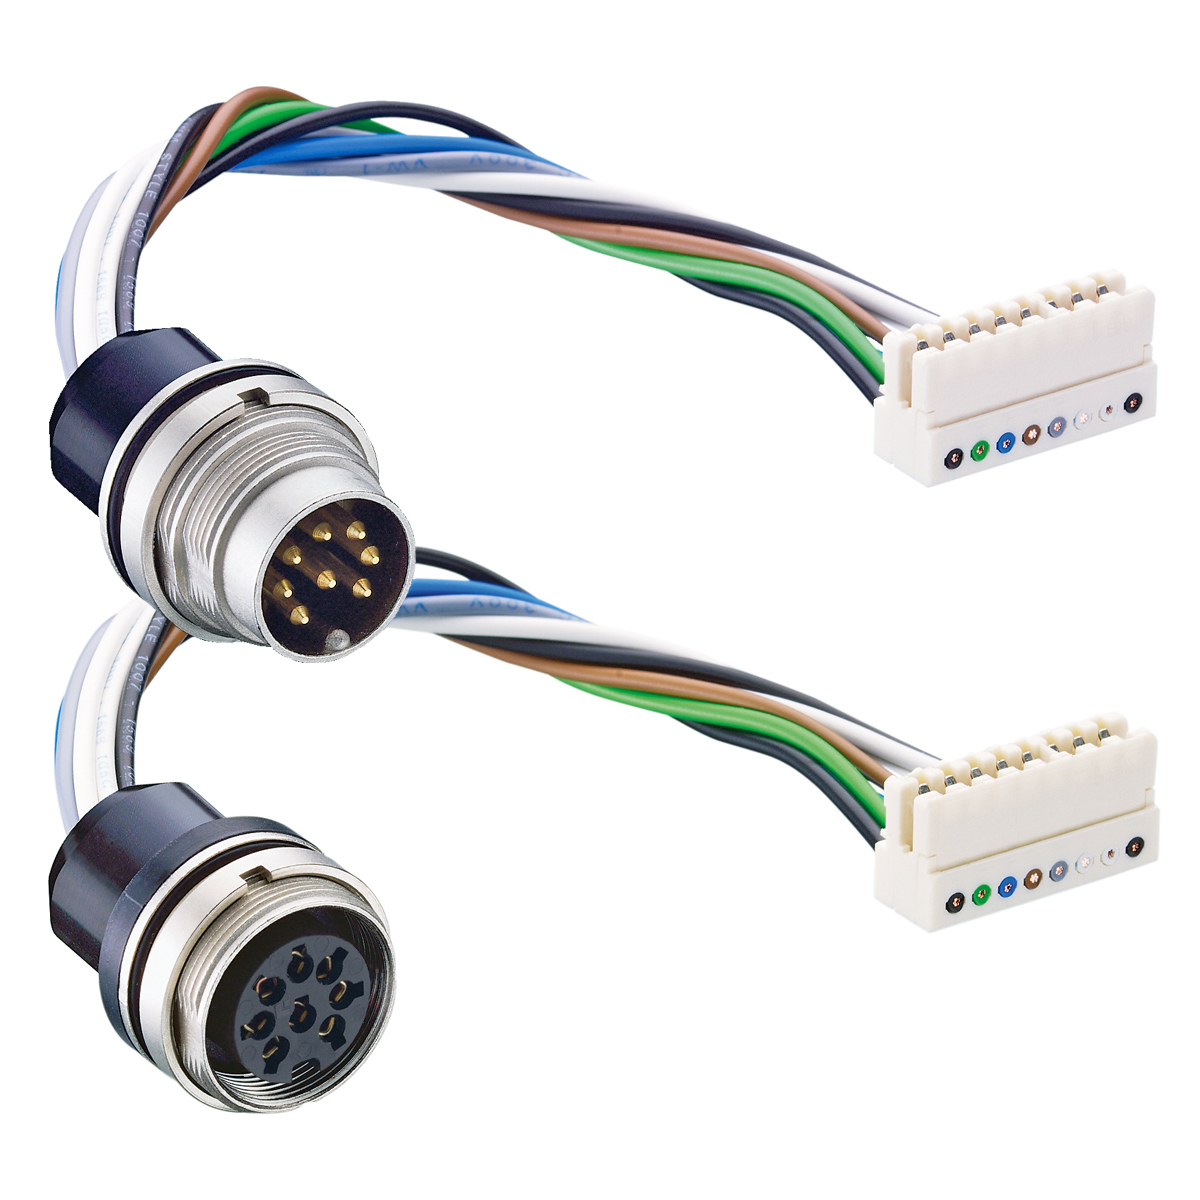 Lumberg: Weitere Produkte auf Anfrage (Series 03 | Circular connectors with threaded joint M16 acc. to IEC 61076-2-106, IP40/IP68)